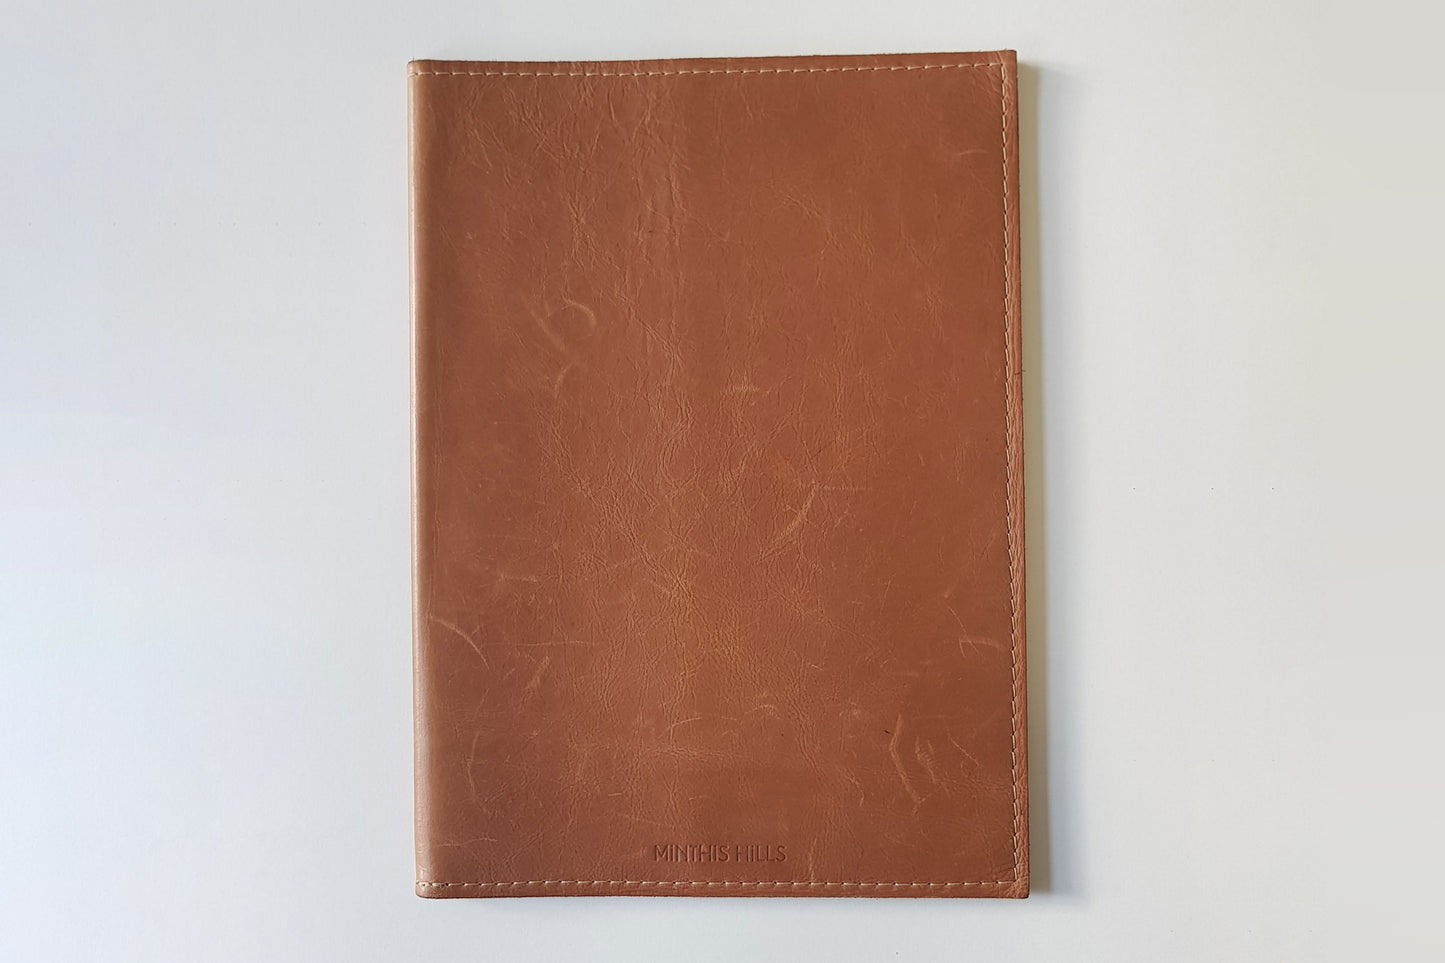 HND Soft Leather